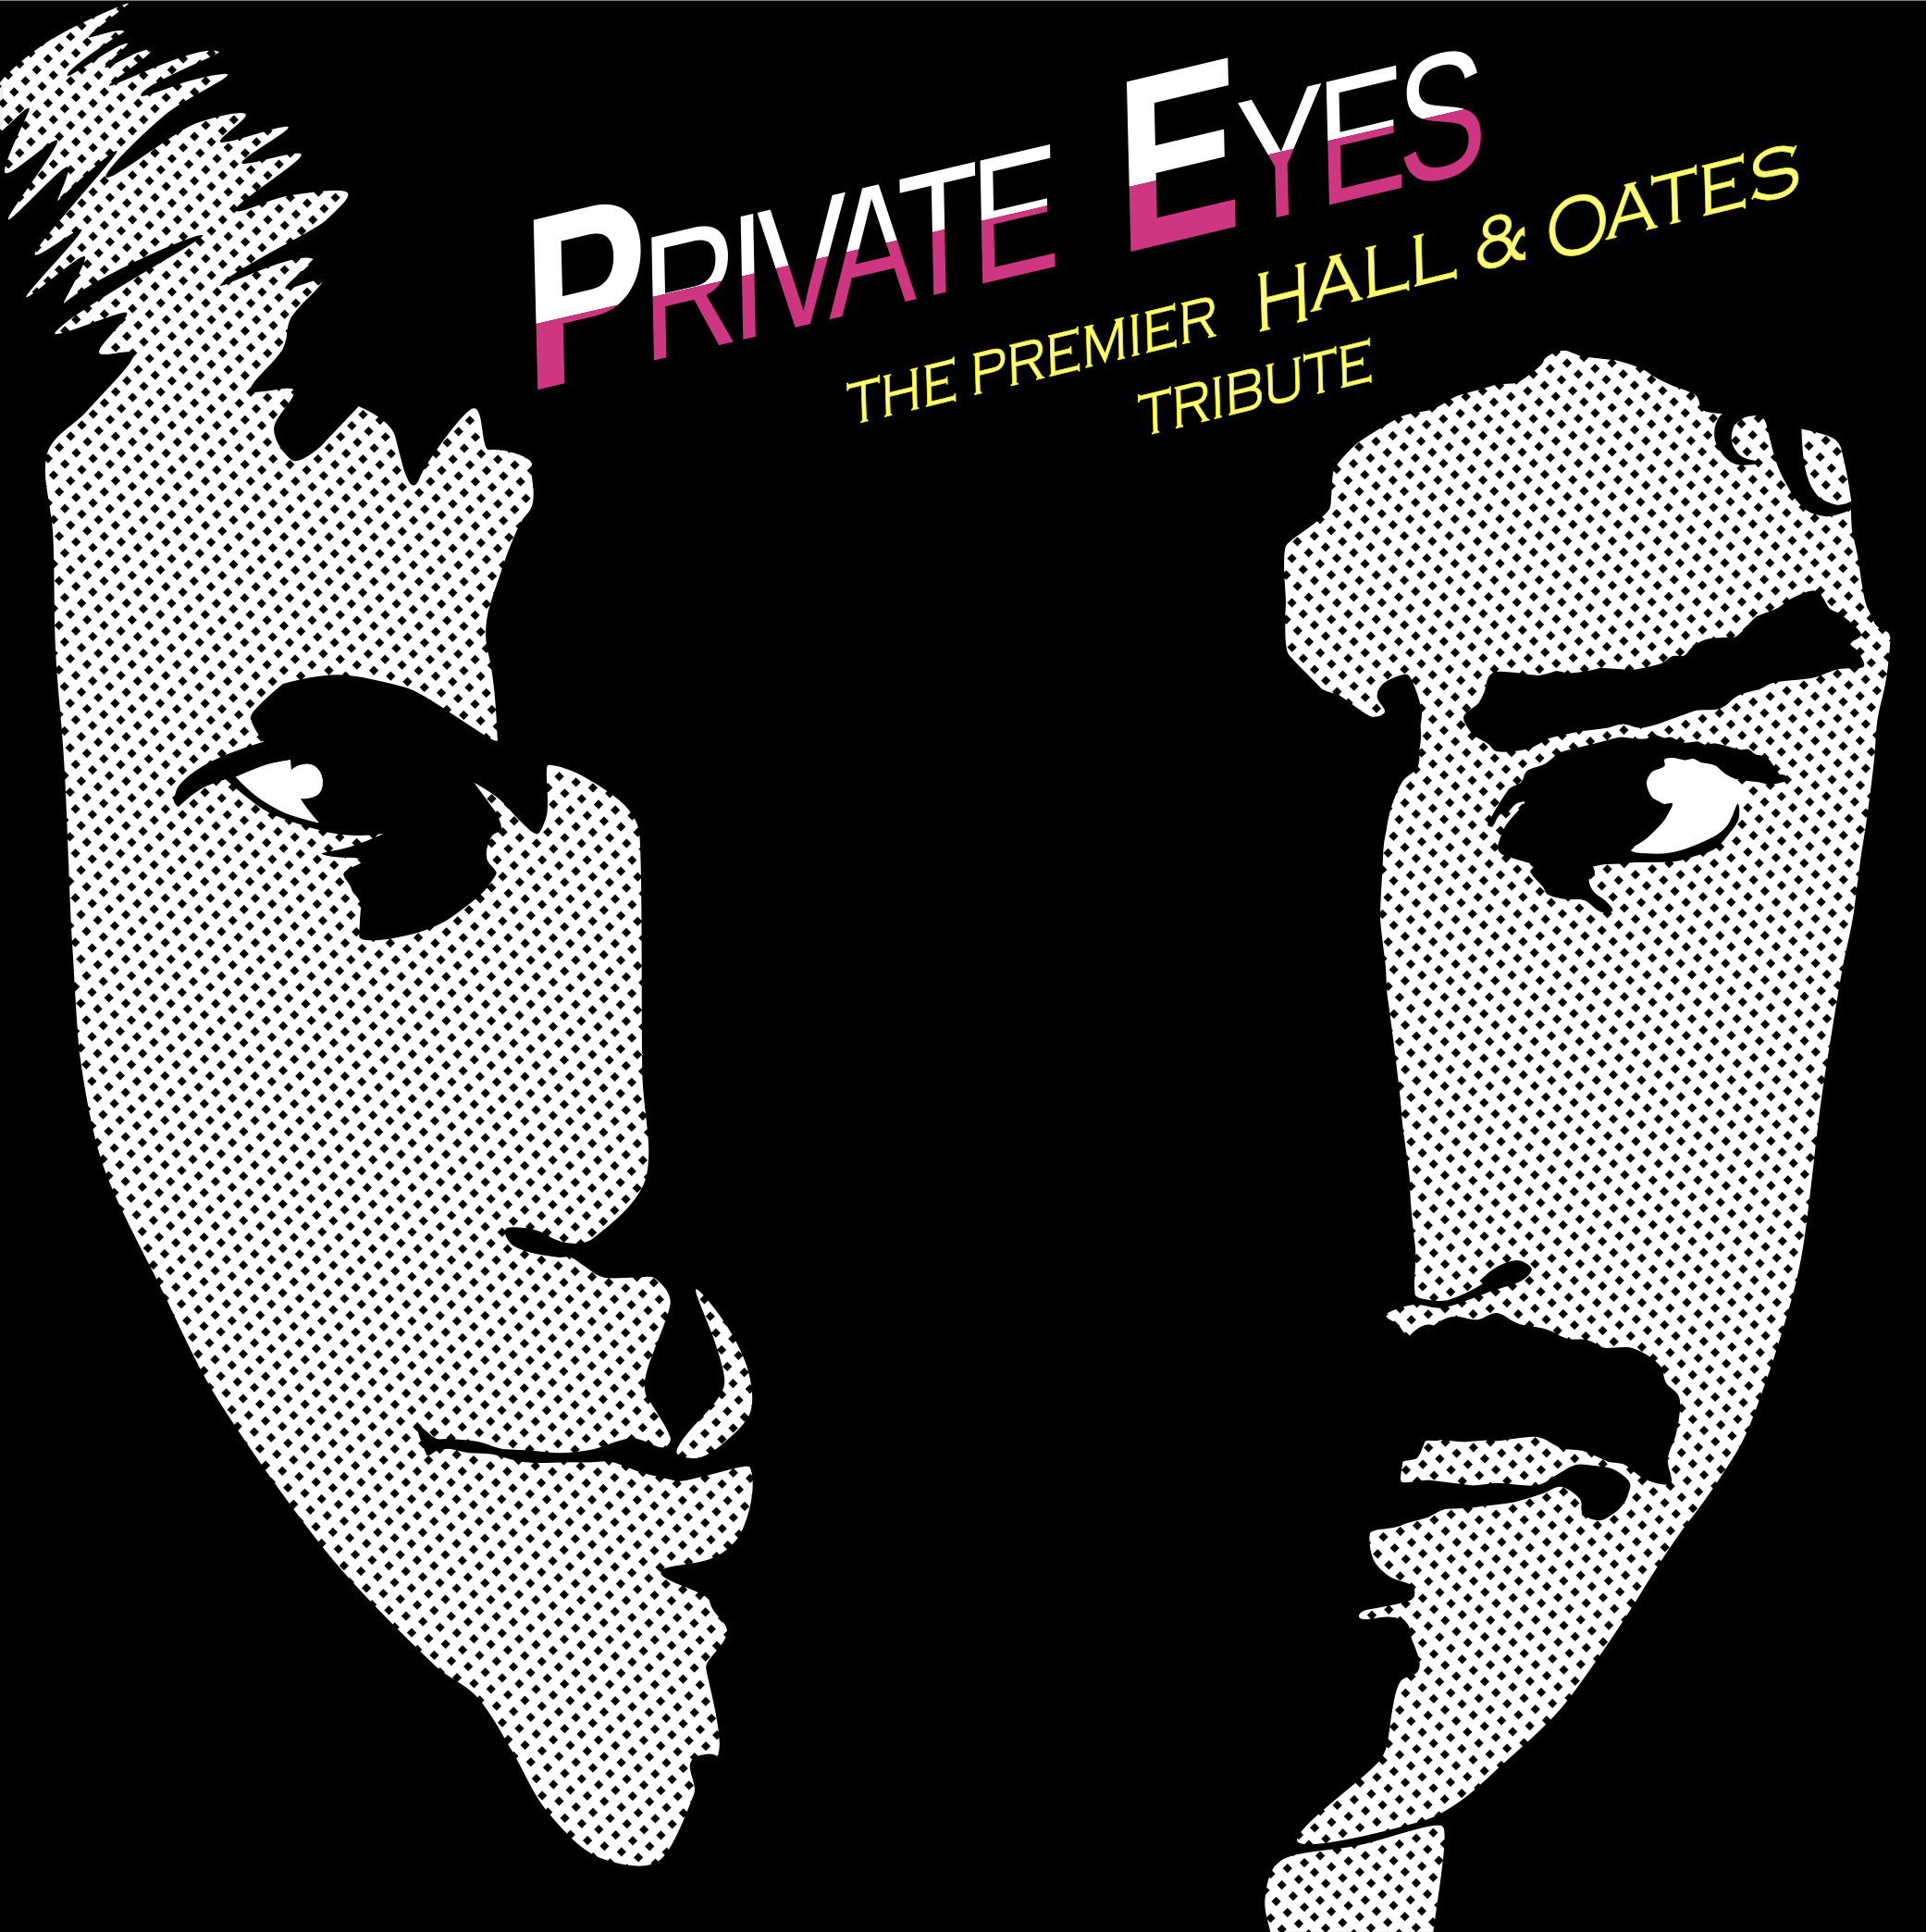 Private Eyes The Premier Hall & Oates Tribute